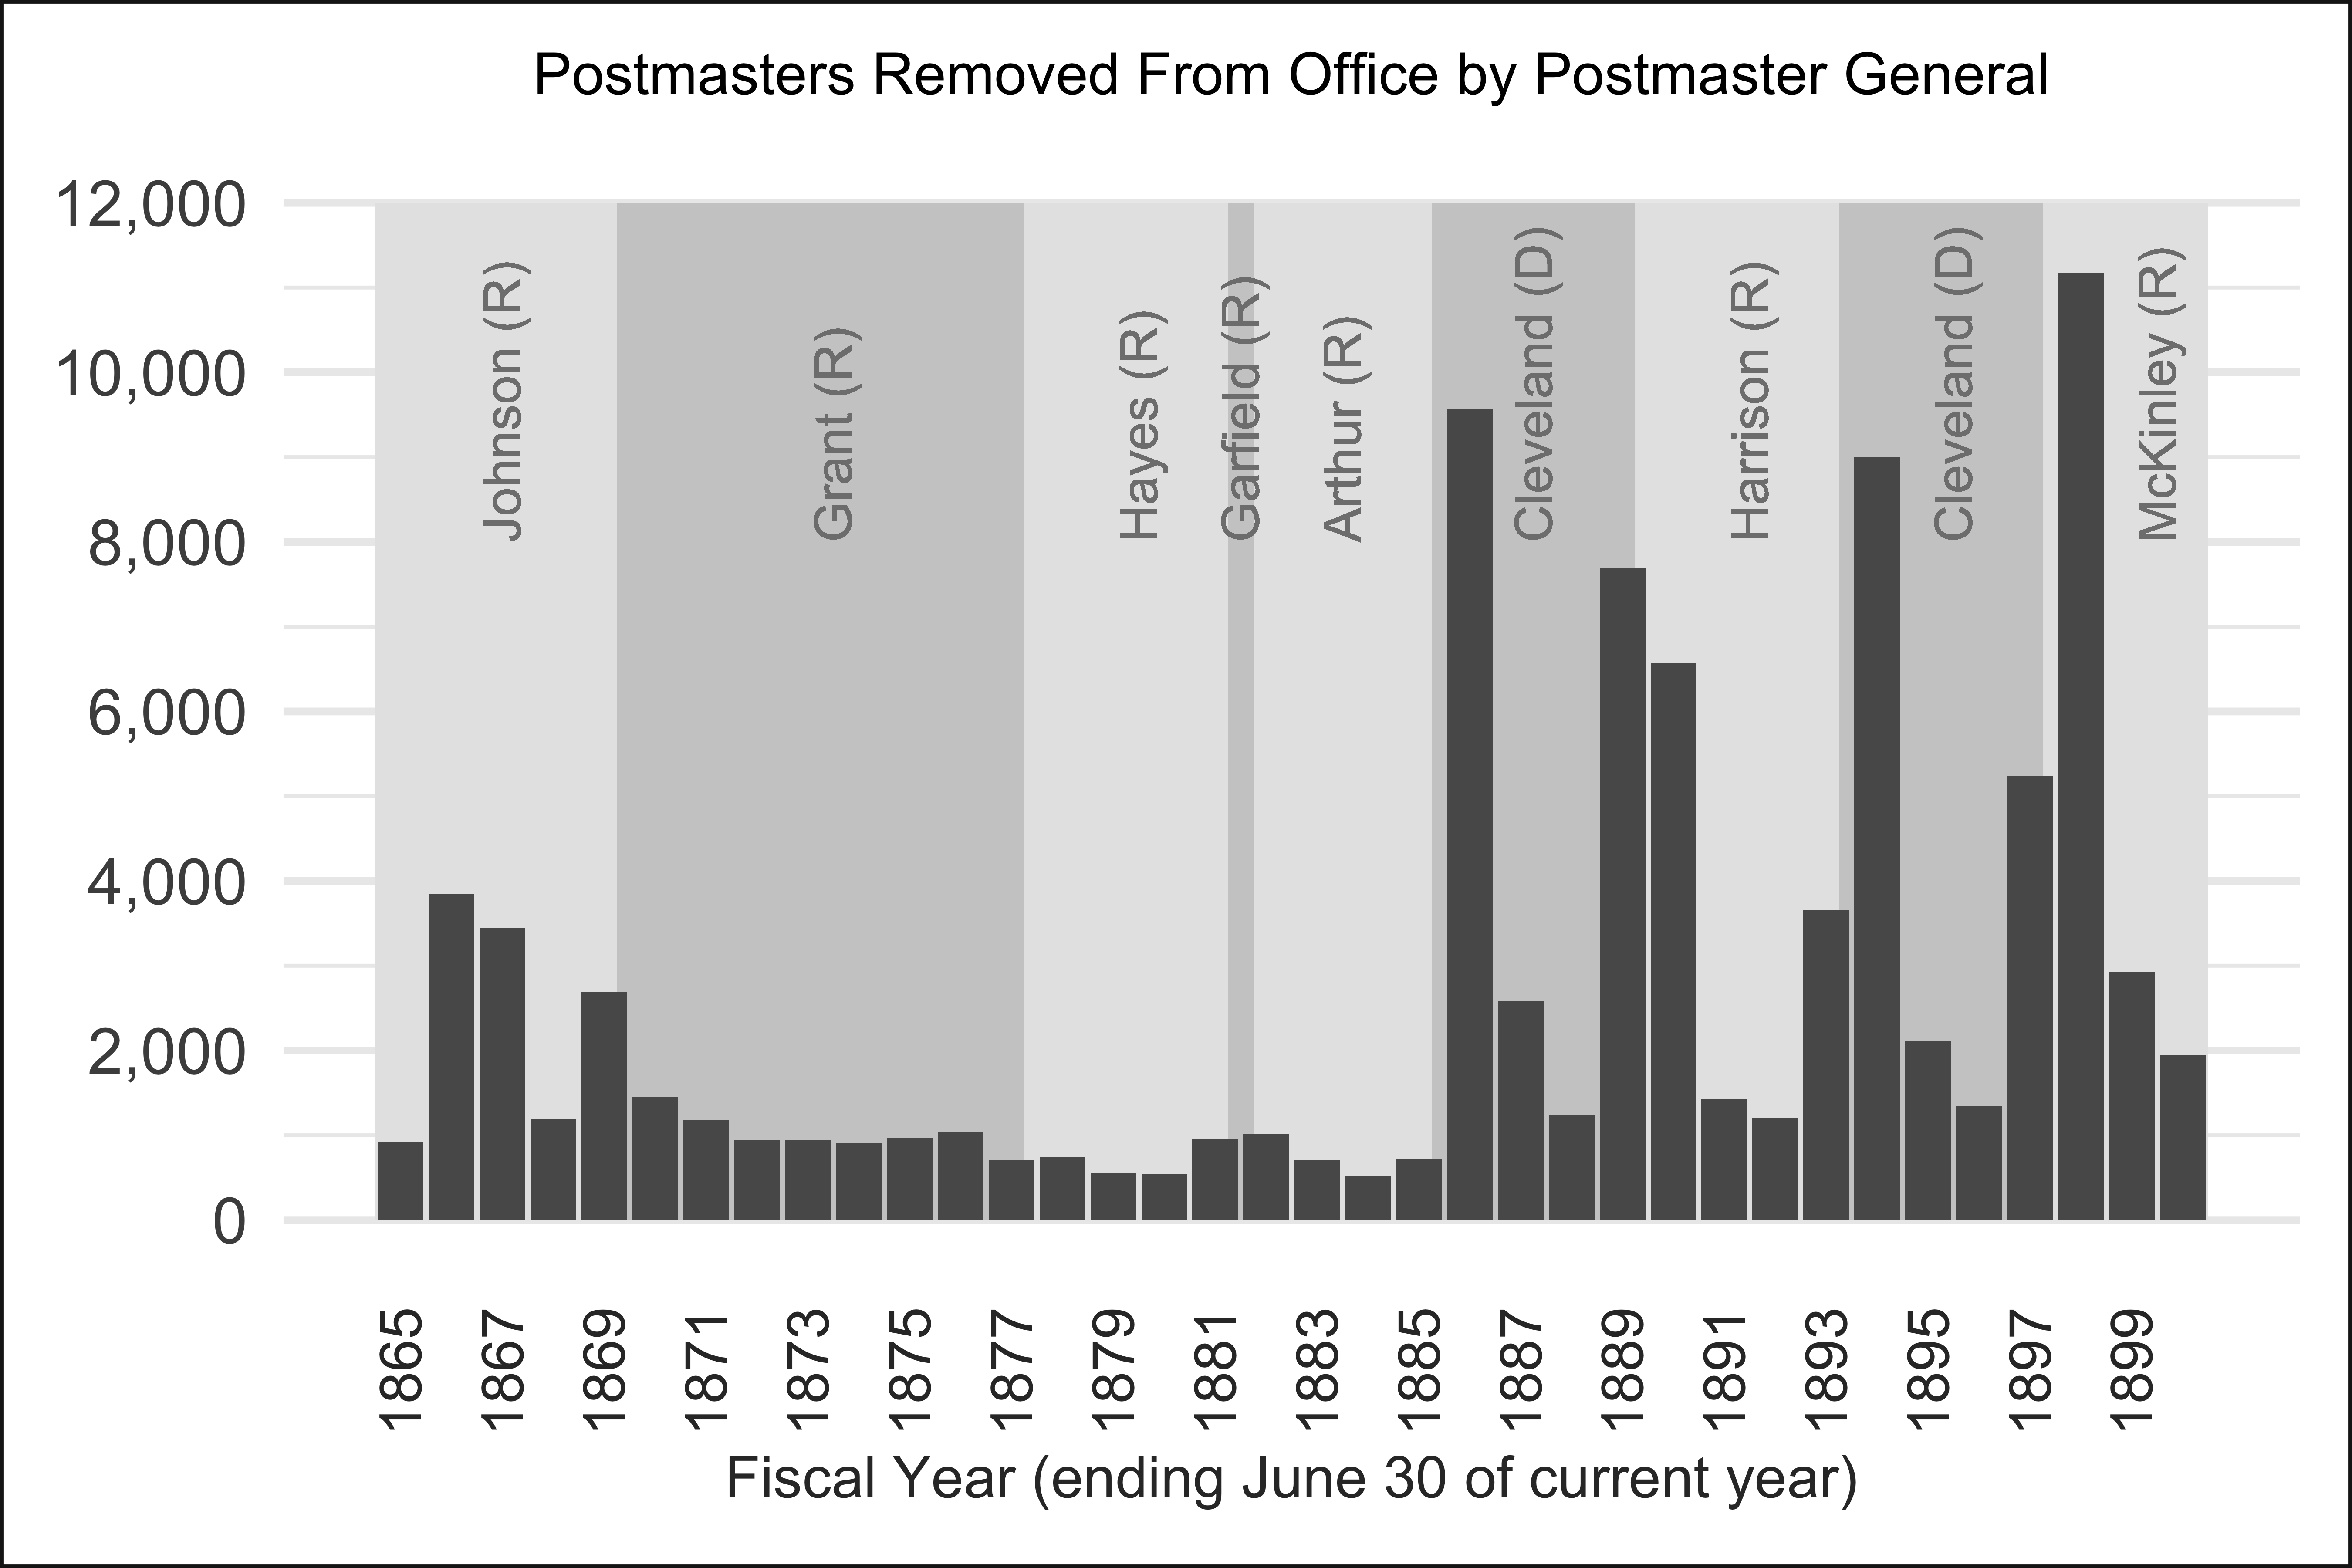 Bar chart showing the number of postmasters removed during each presidential administration from eighteen sixty-five to nineteen hundred.